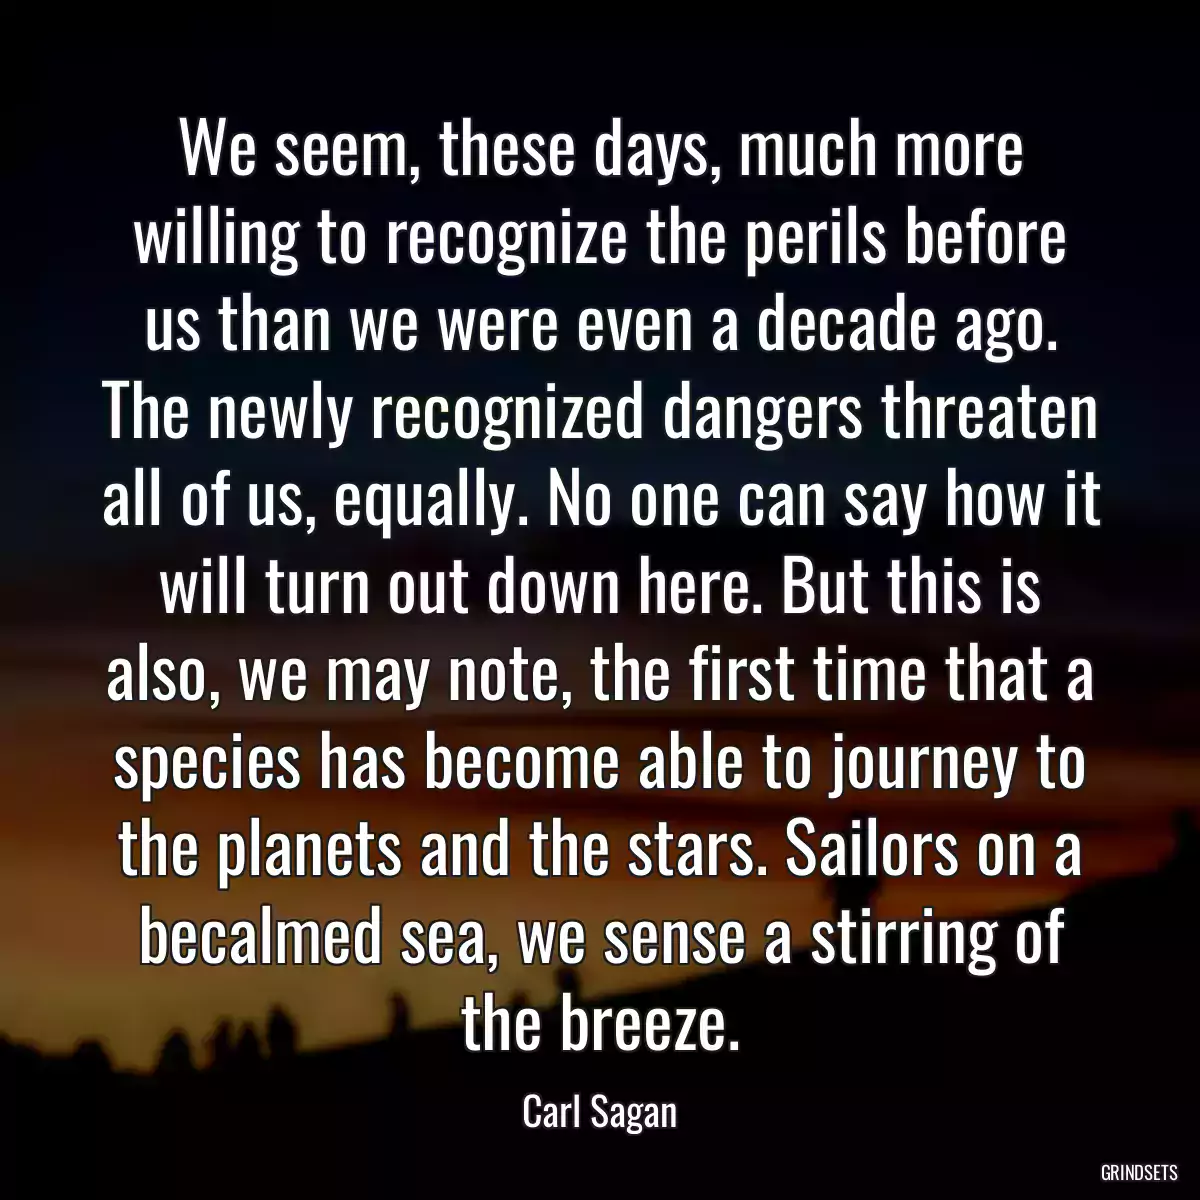 We seem, these days, much more willing to recognize the perils before us than we were even a decade ago. The newly recognized dangers threaten all of us, equally. No one can say how it will turn out down here. But this is also, we may note, the first time that a species has become able to journey to the planets and the stars. Sailors on a becalmed sea, we sense a stirring of the breeze.